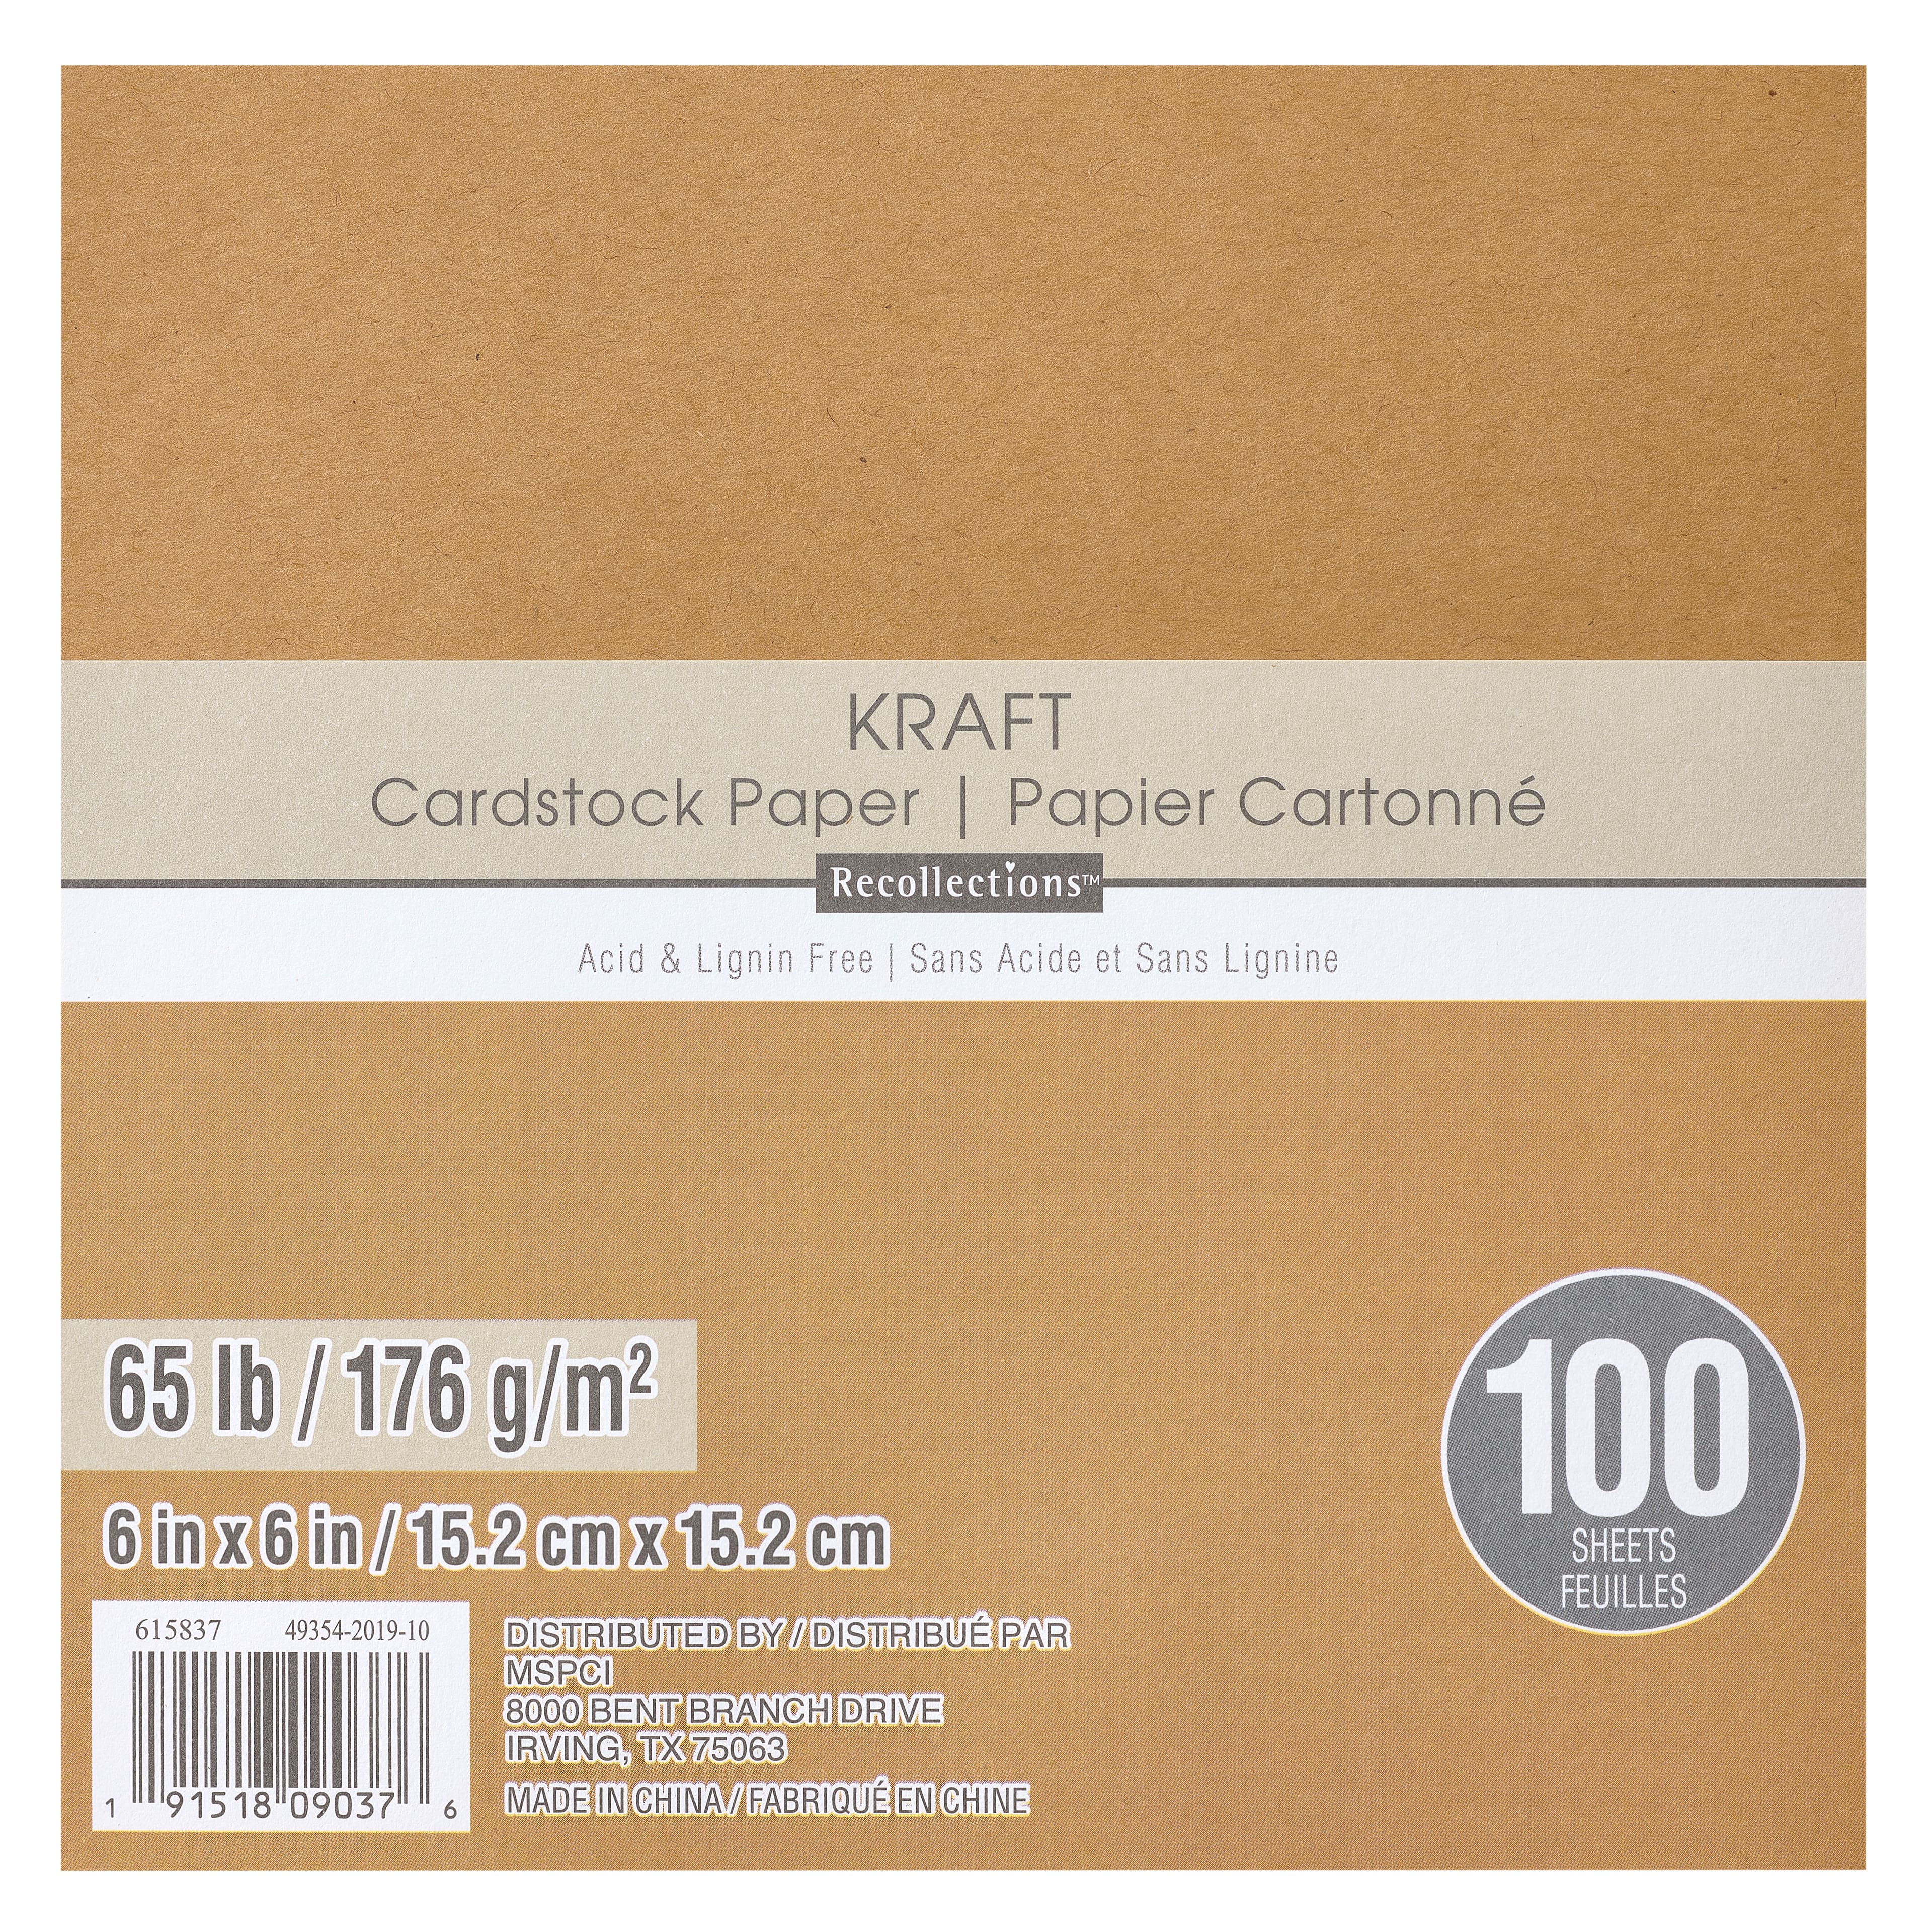 12 Packs: 100 ct. (1,200 total) White 6 x 6 Cardstock Paper by